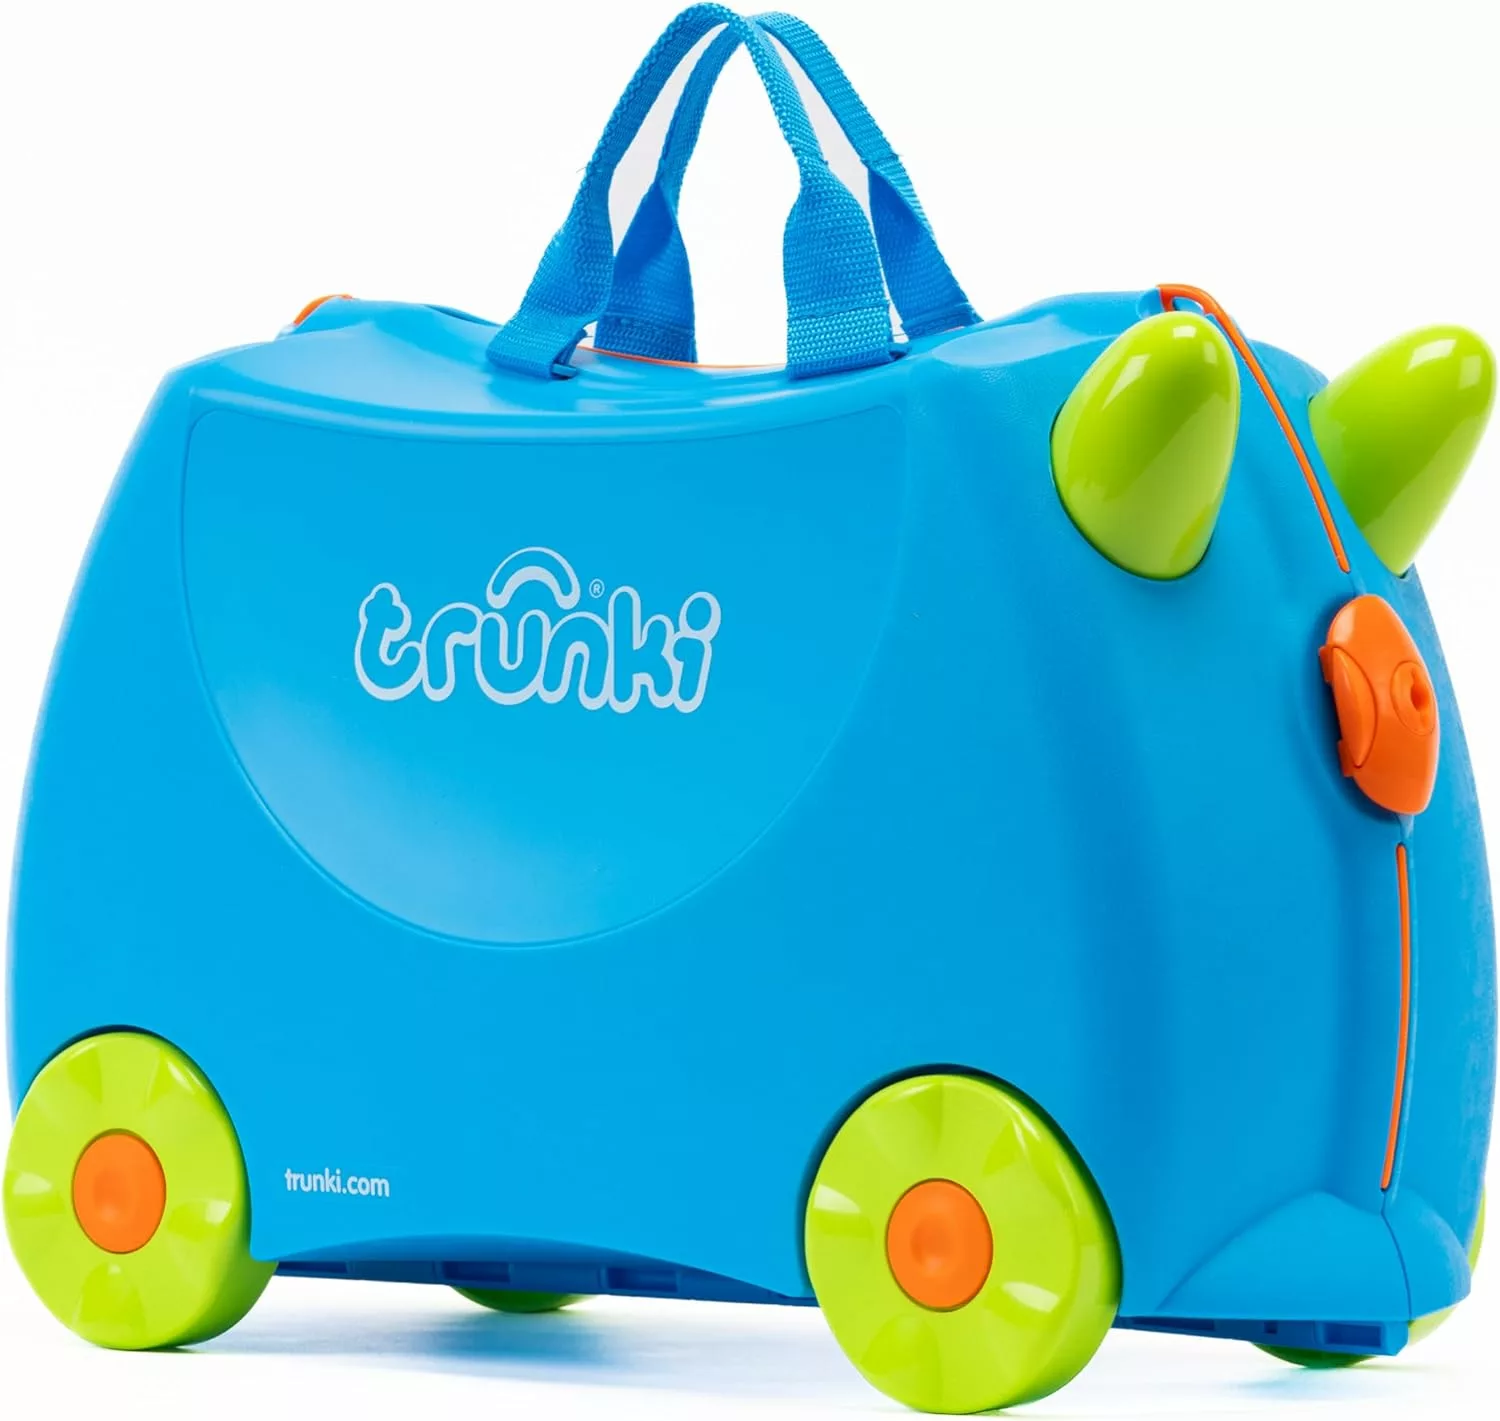 Trunki Children’s Ride-On Suitcase and Kid's Hand Luggage | Ideal Toy Gift for 3 Year Old Boys : Terrance (Blue)